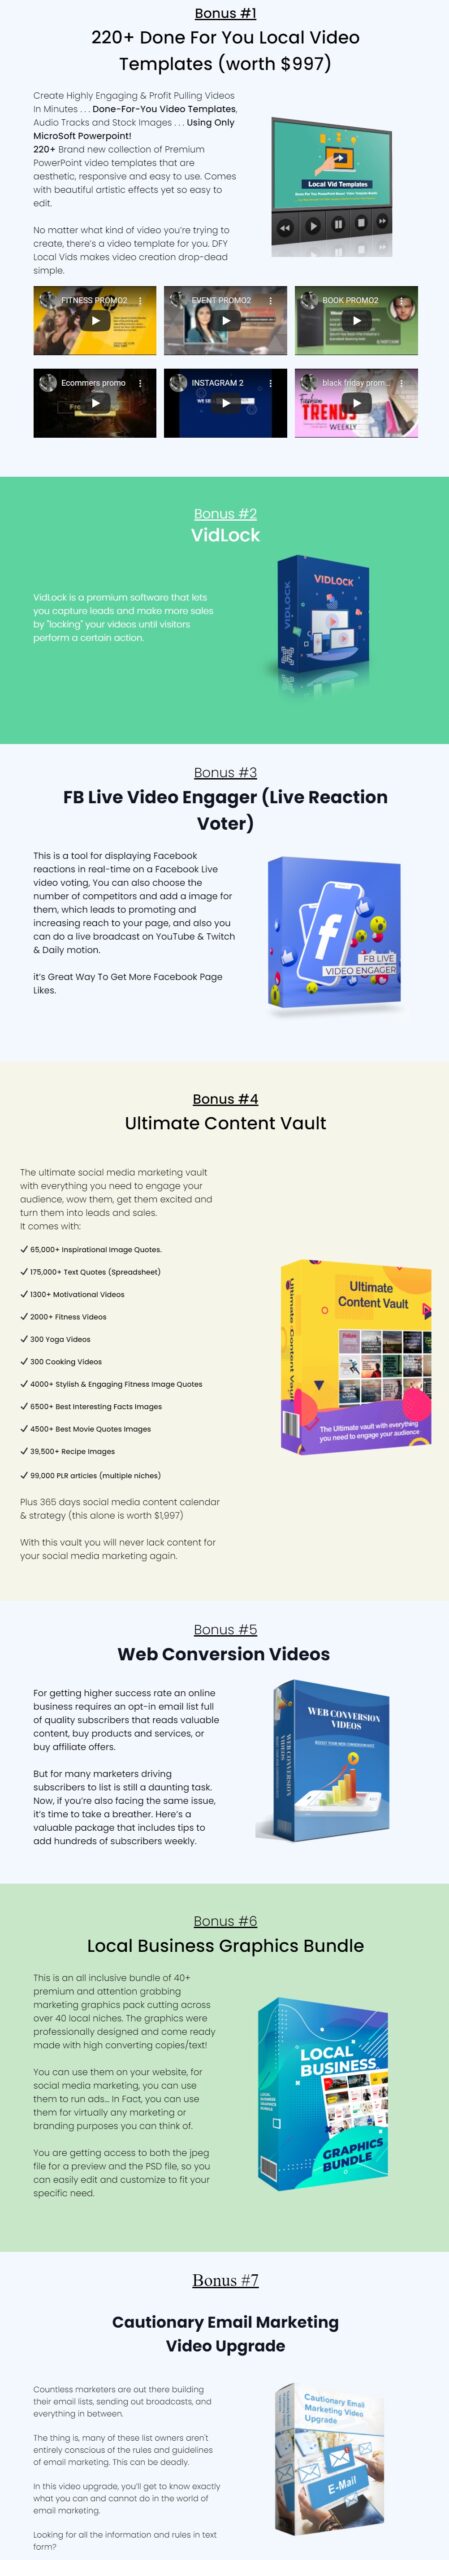 VideoFunnel Review & OTO: Powerful Video Software That Creates Most Engaging Video Funnels 2